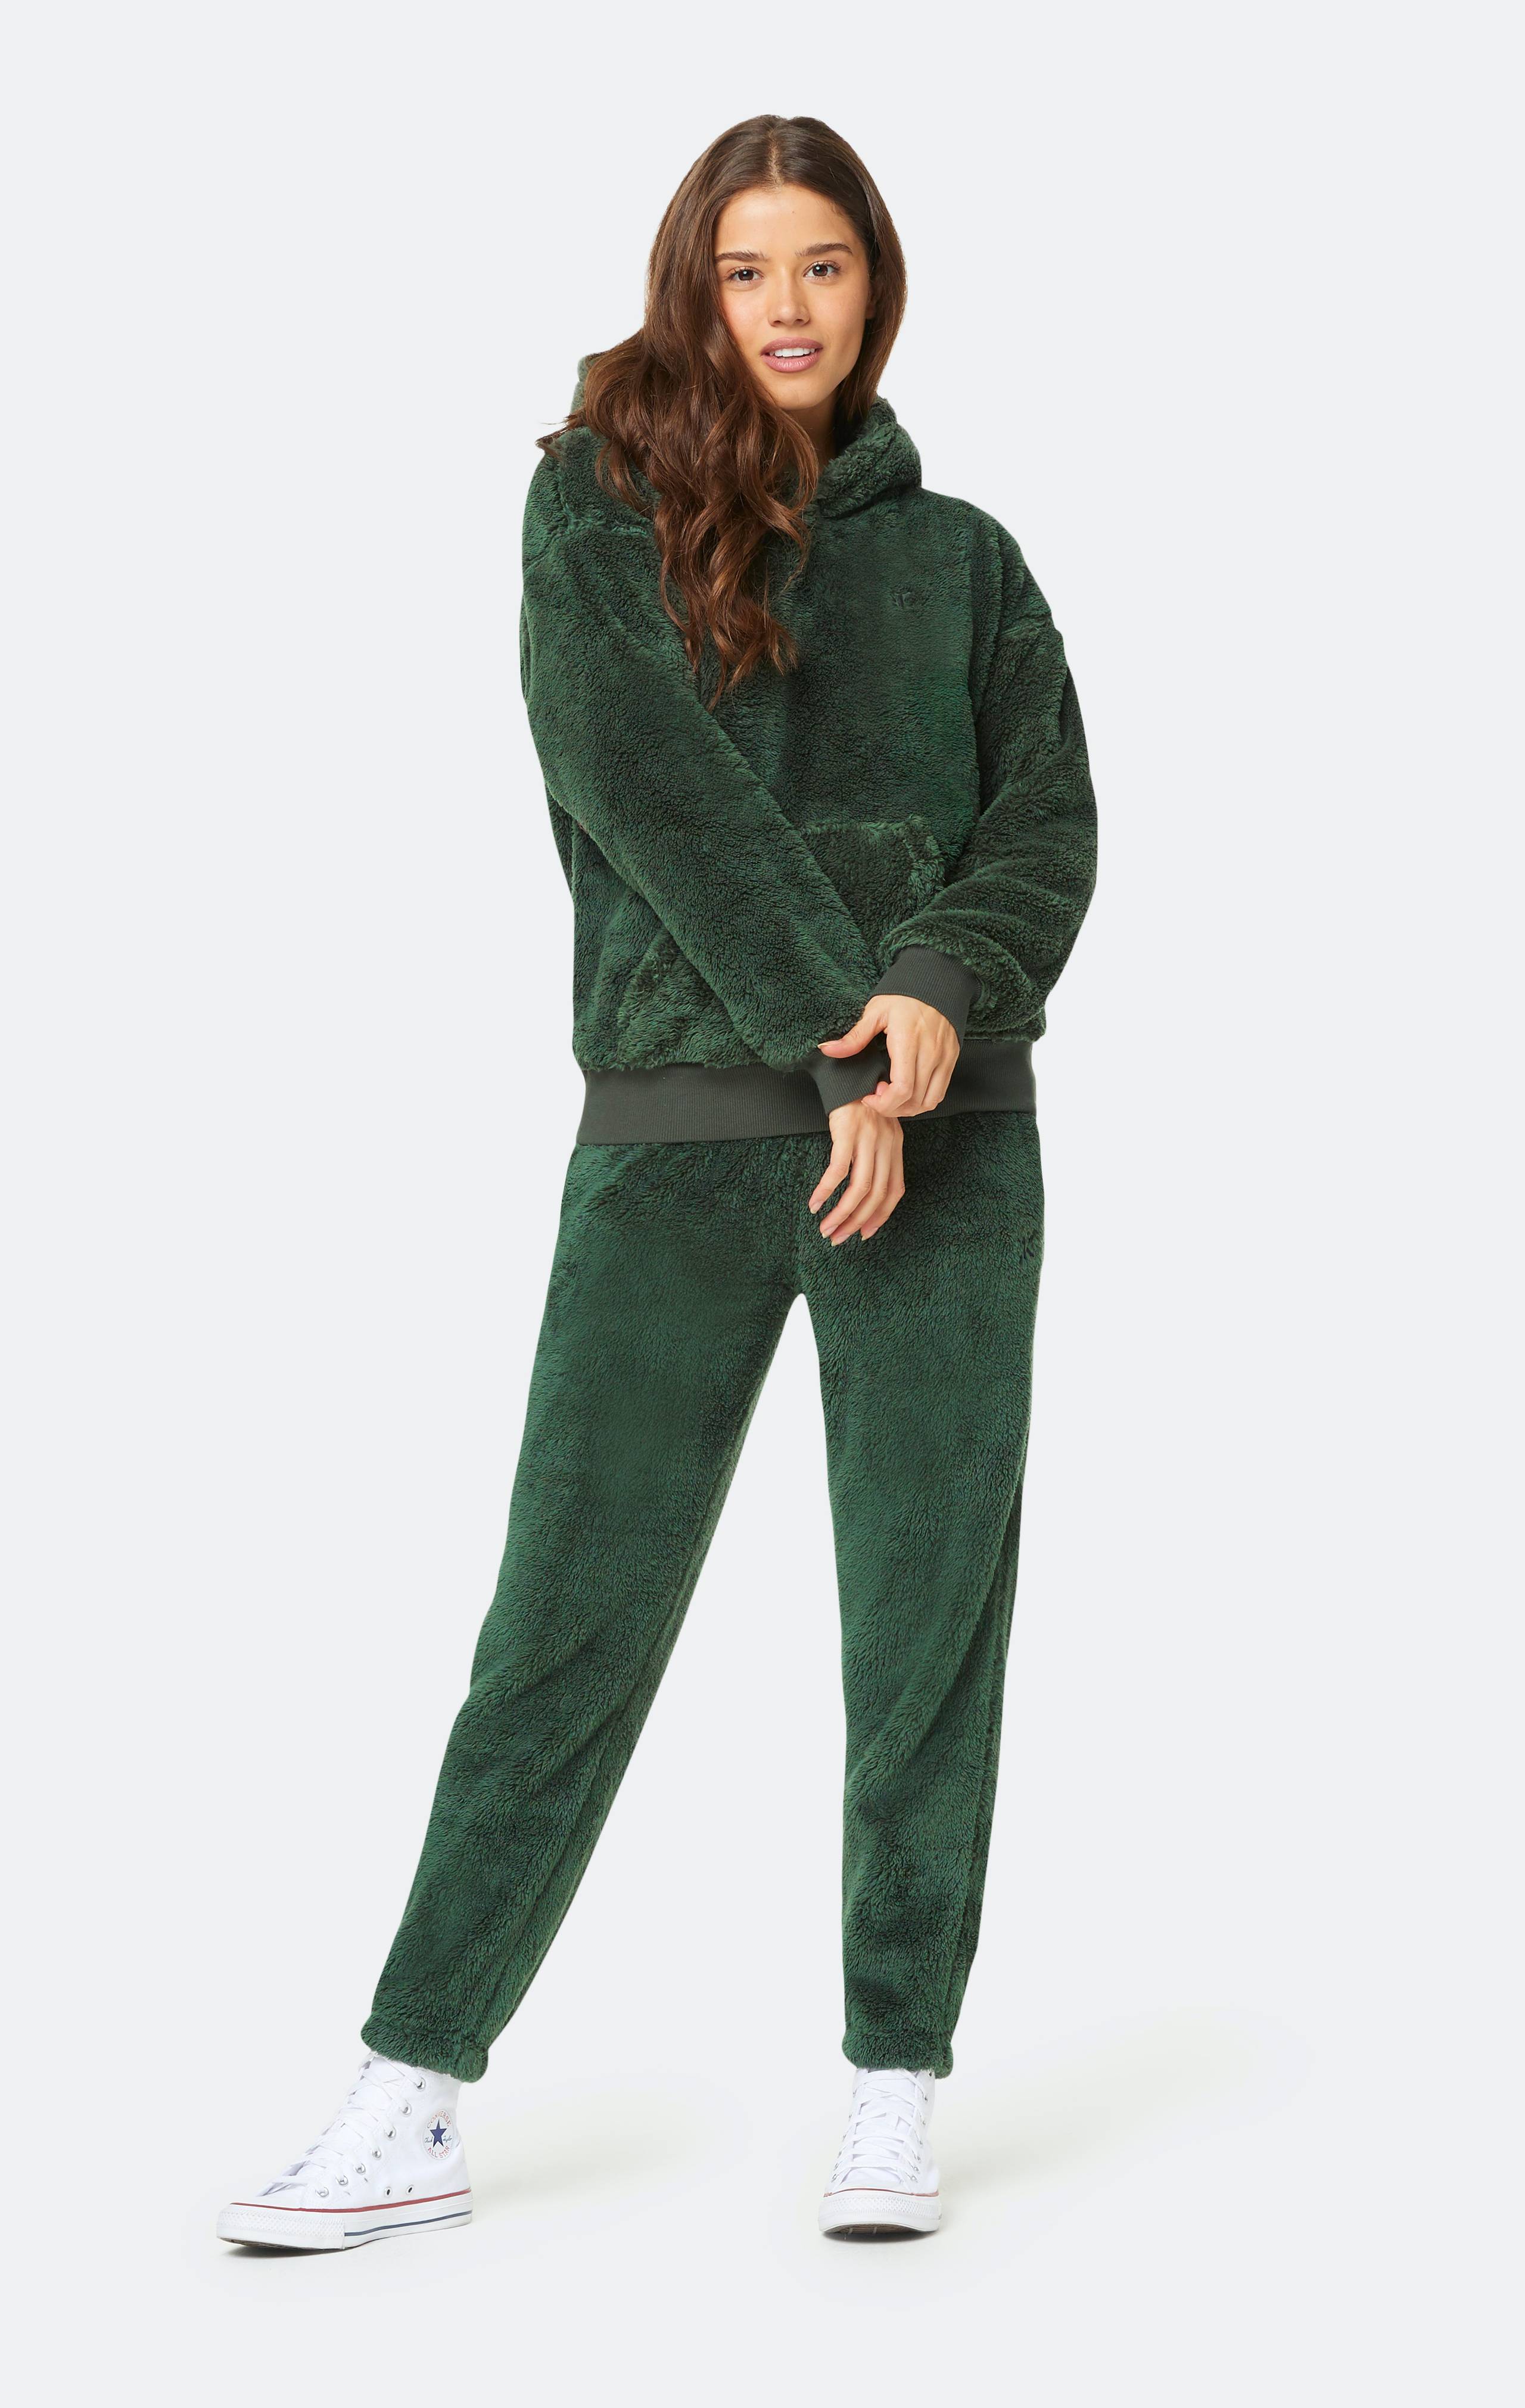 Onepiece The Puppy Pant Green - 10